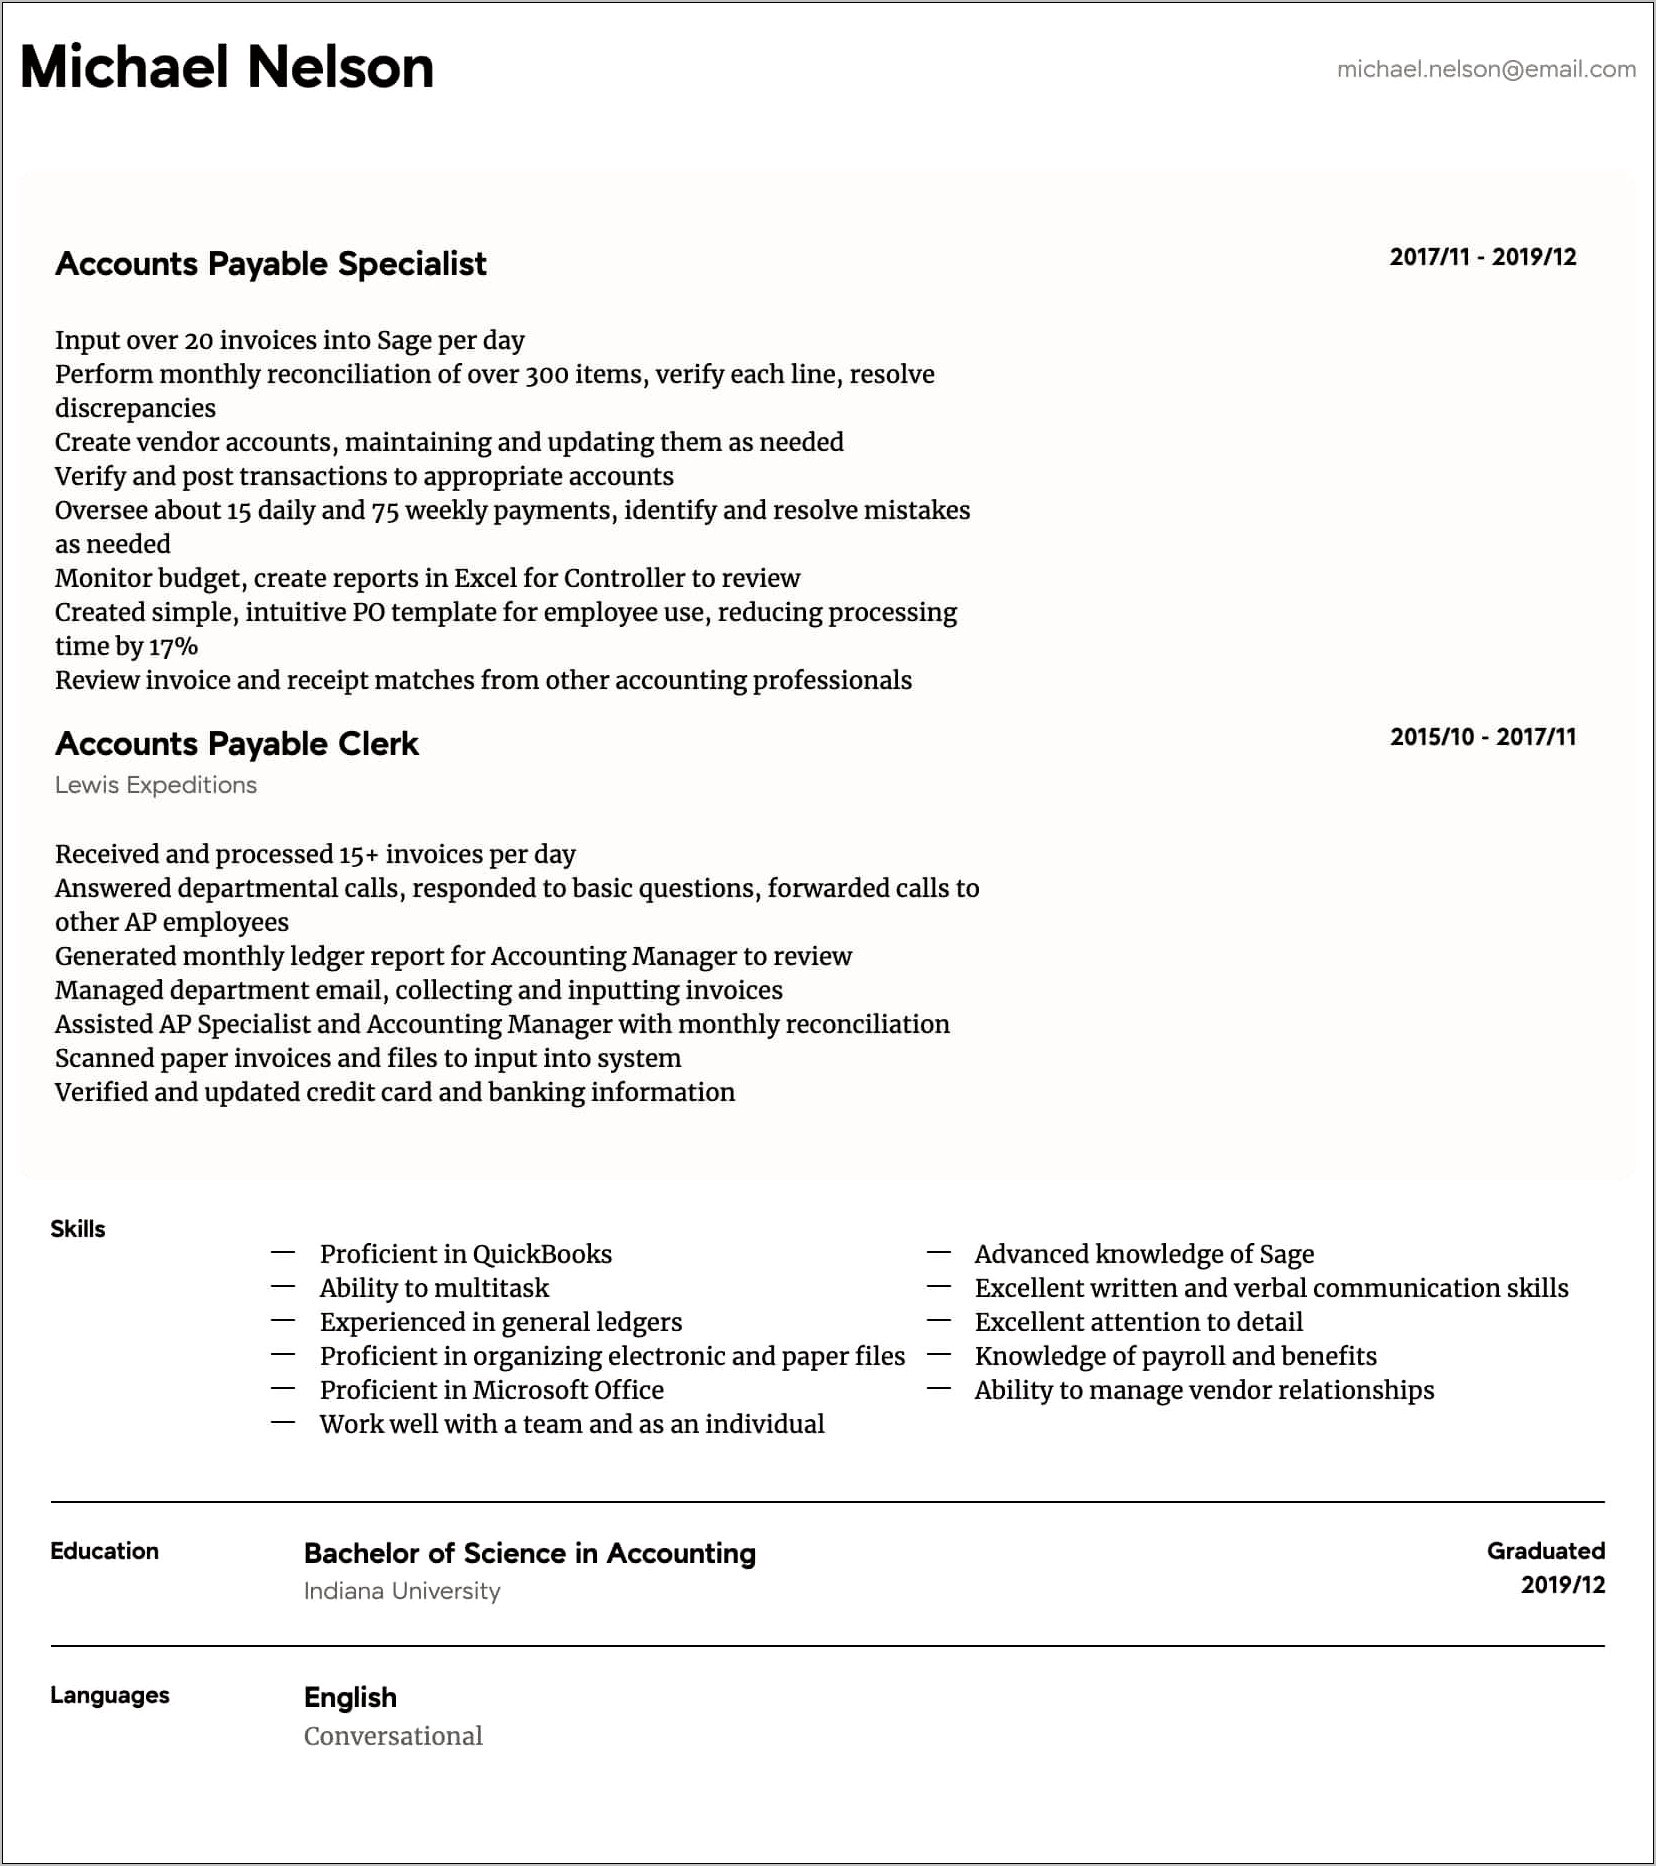 Resume Sample With Cpa In Process